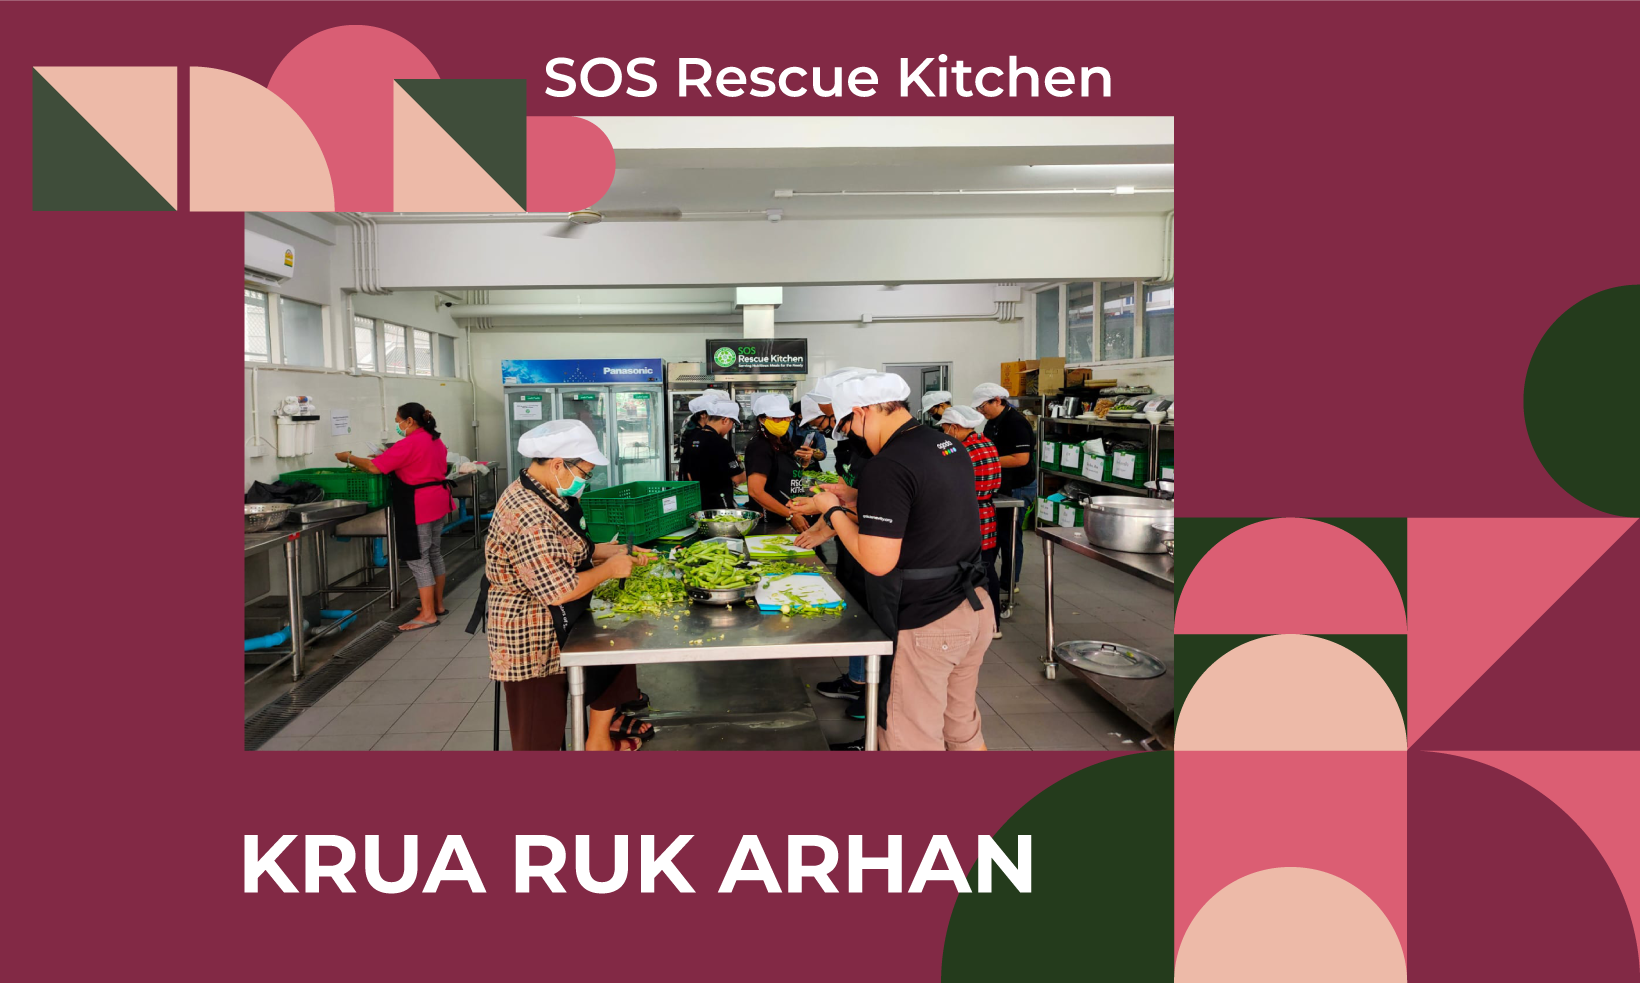 SOS rescue kitchen organised by Scholars of Sustenance foundation thailand to cook meals for those in need from surplus food